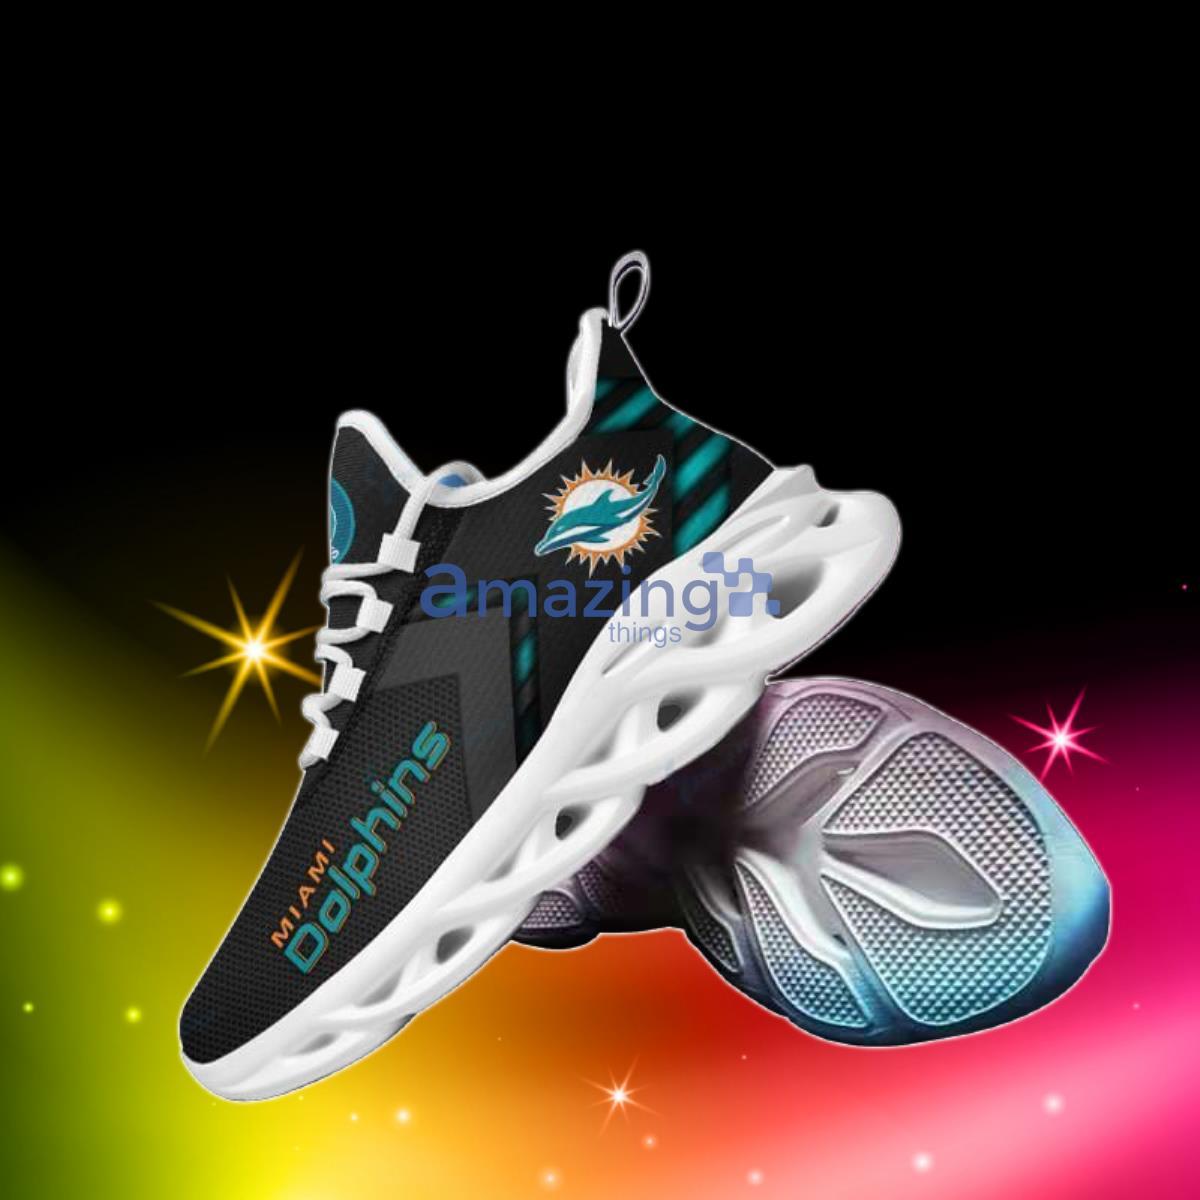 Miami Dolphins Football Team Max Soul Shoes Style Sneakers For Fans Product Photo 1